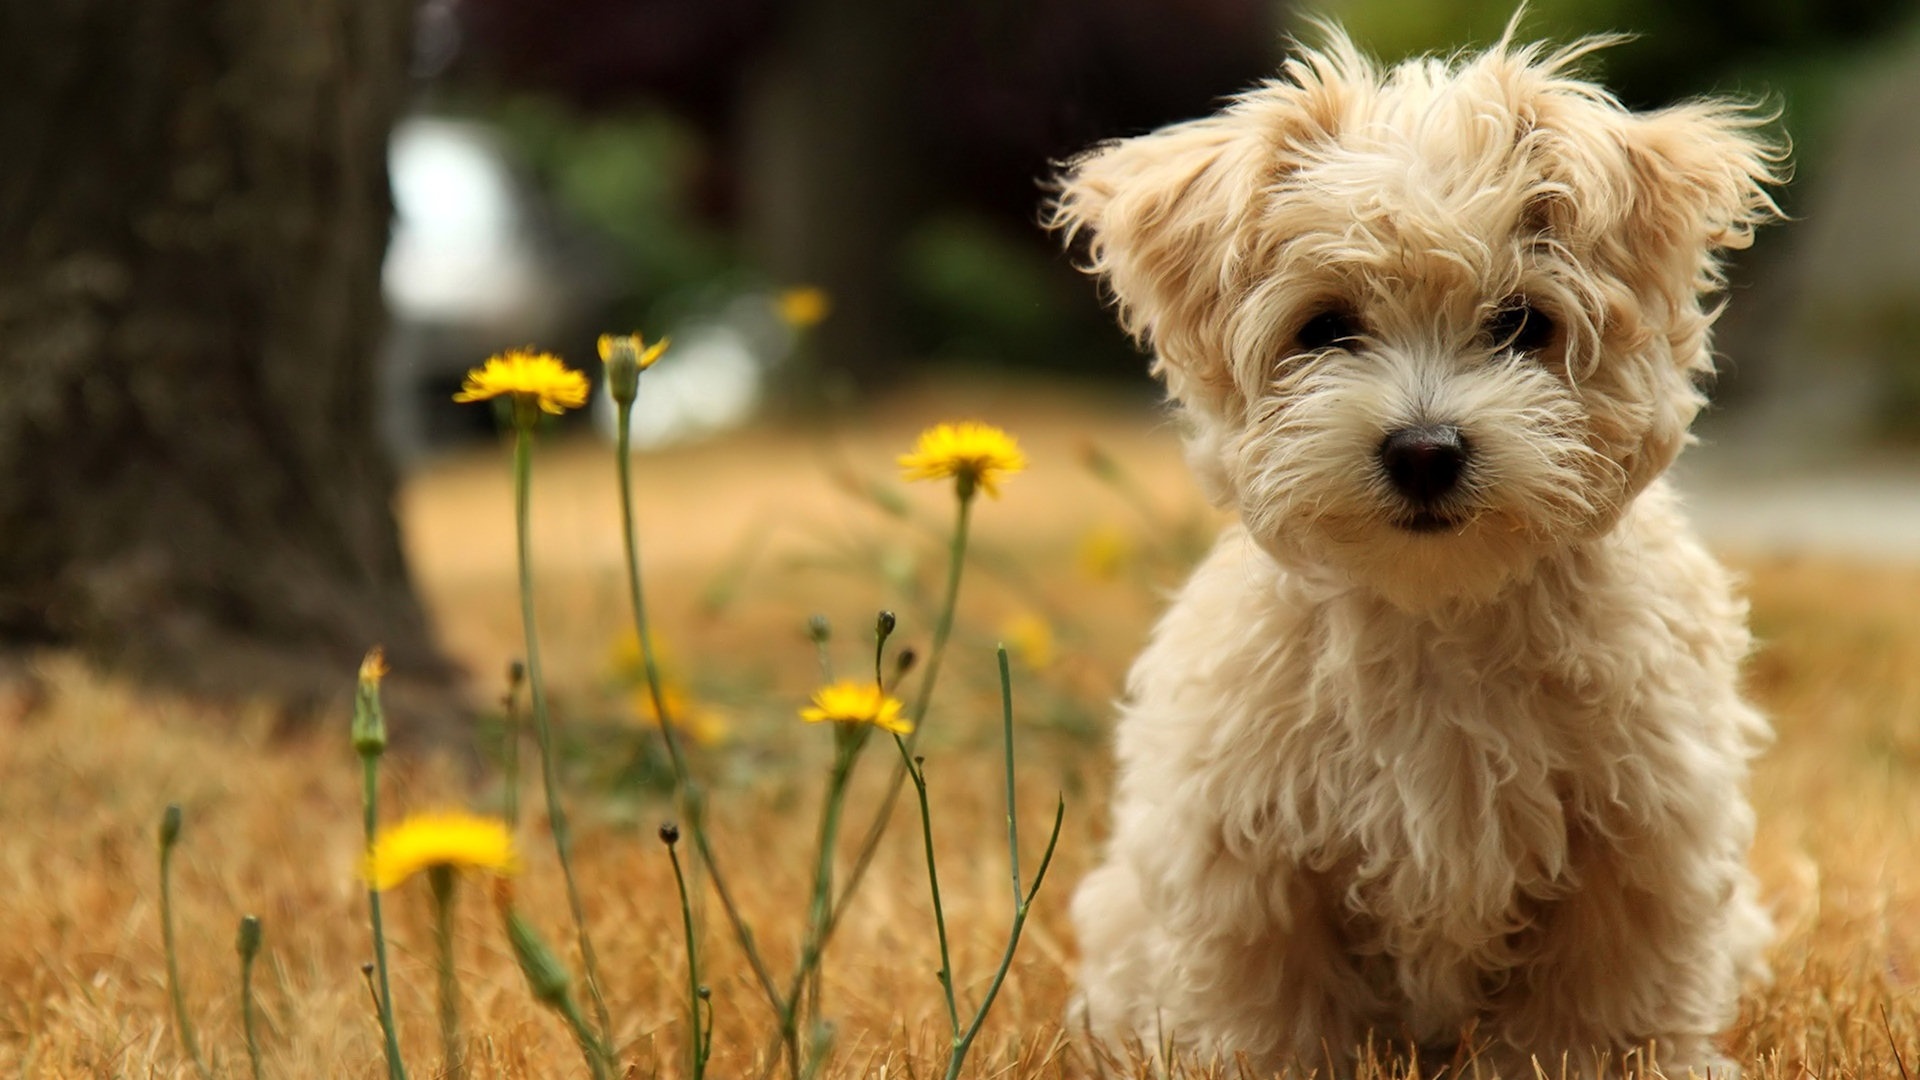 Cute dogs wallpapers hd